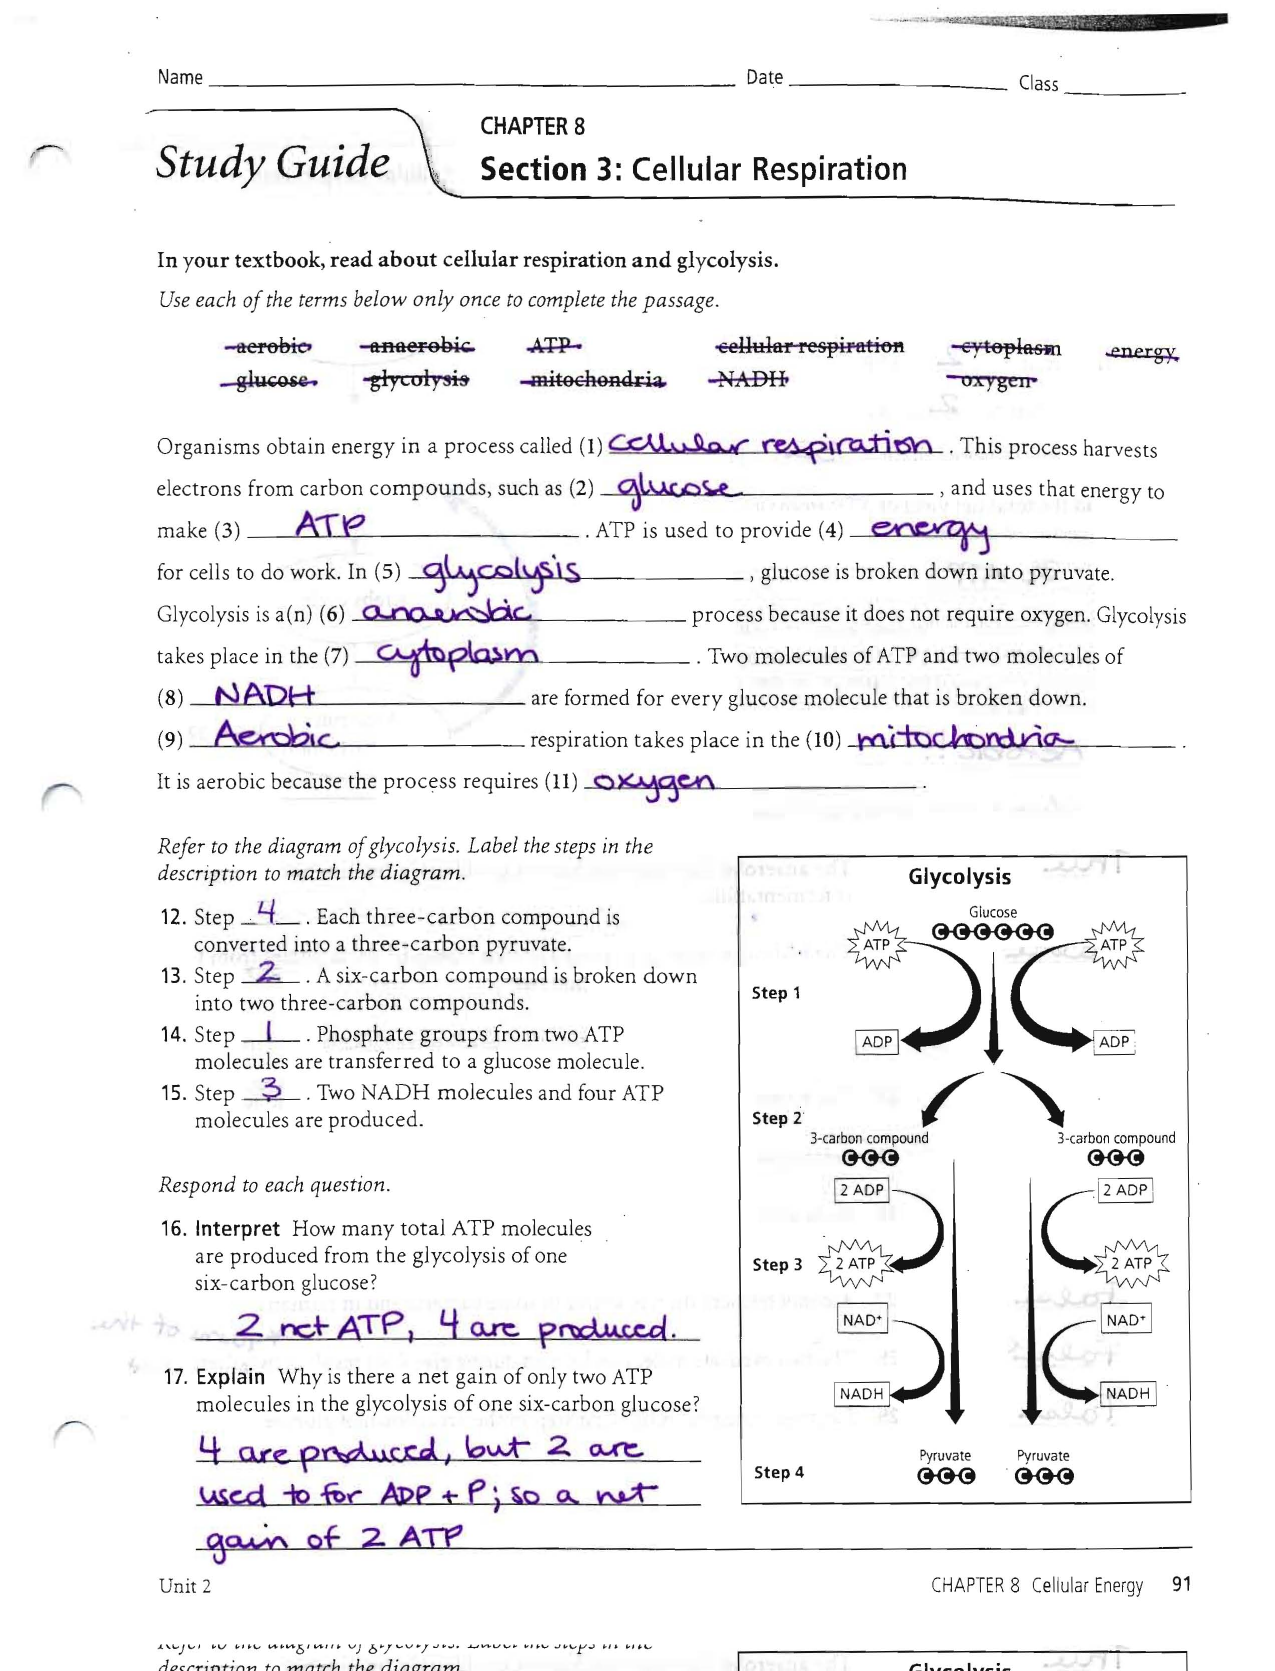 Chapter 8 Photosynthesis Graphic Organizer Flow Chart Answers